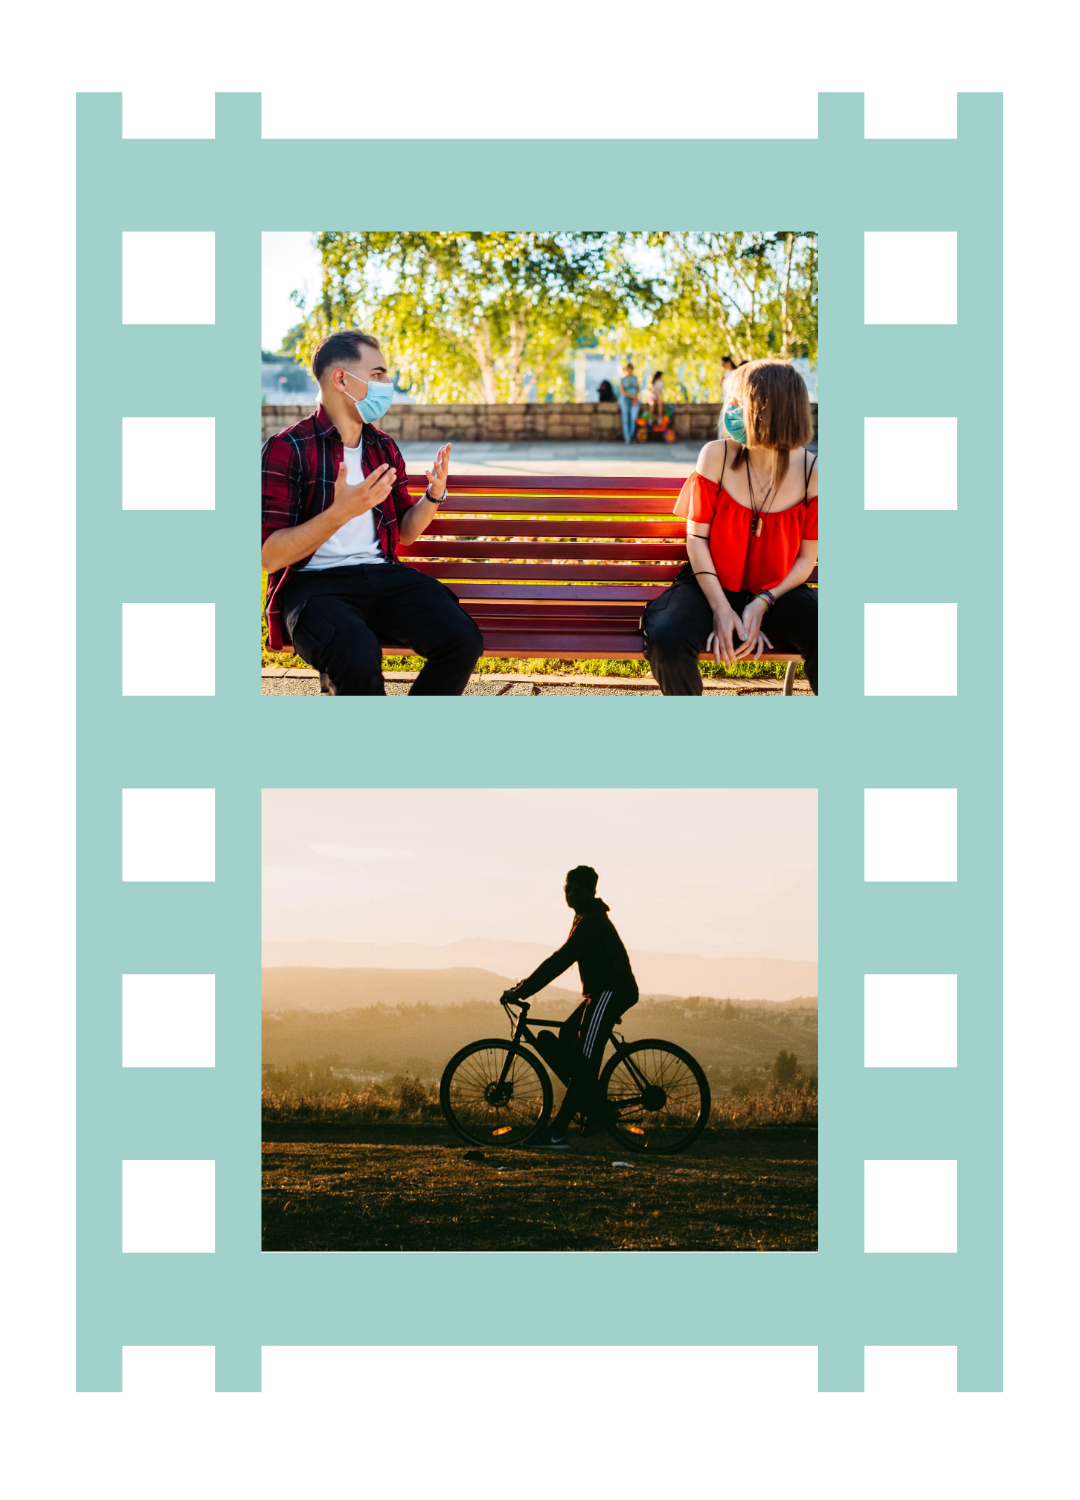 Image of neighbors sitting on park bench and youth riding a bicycle at sunset